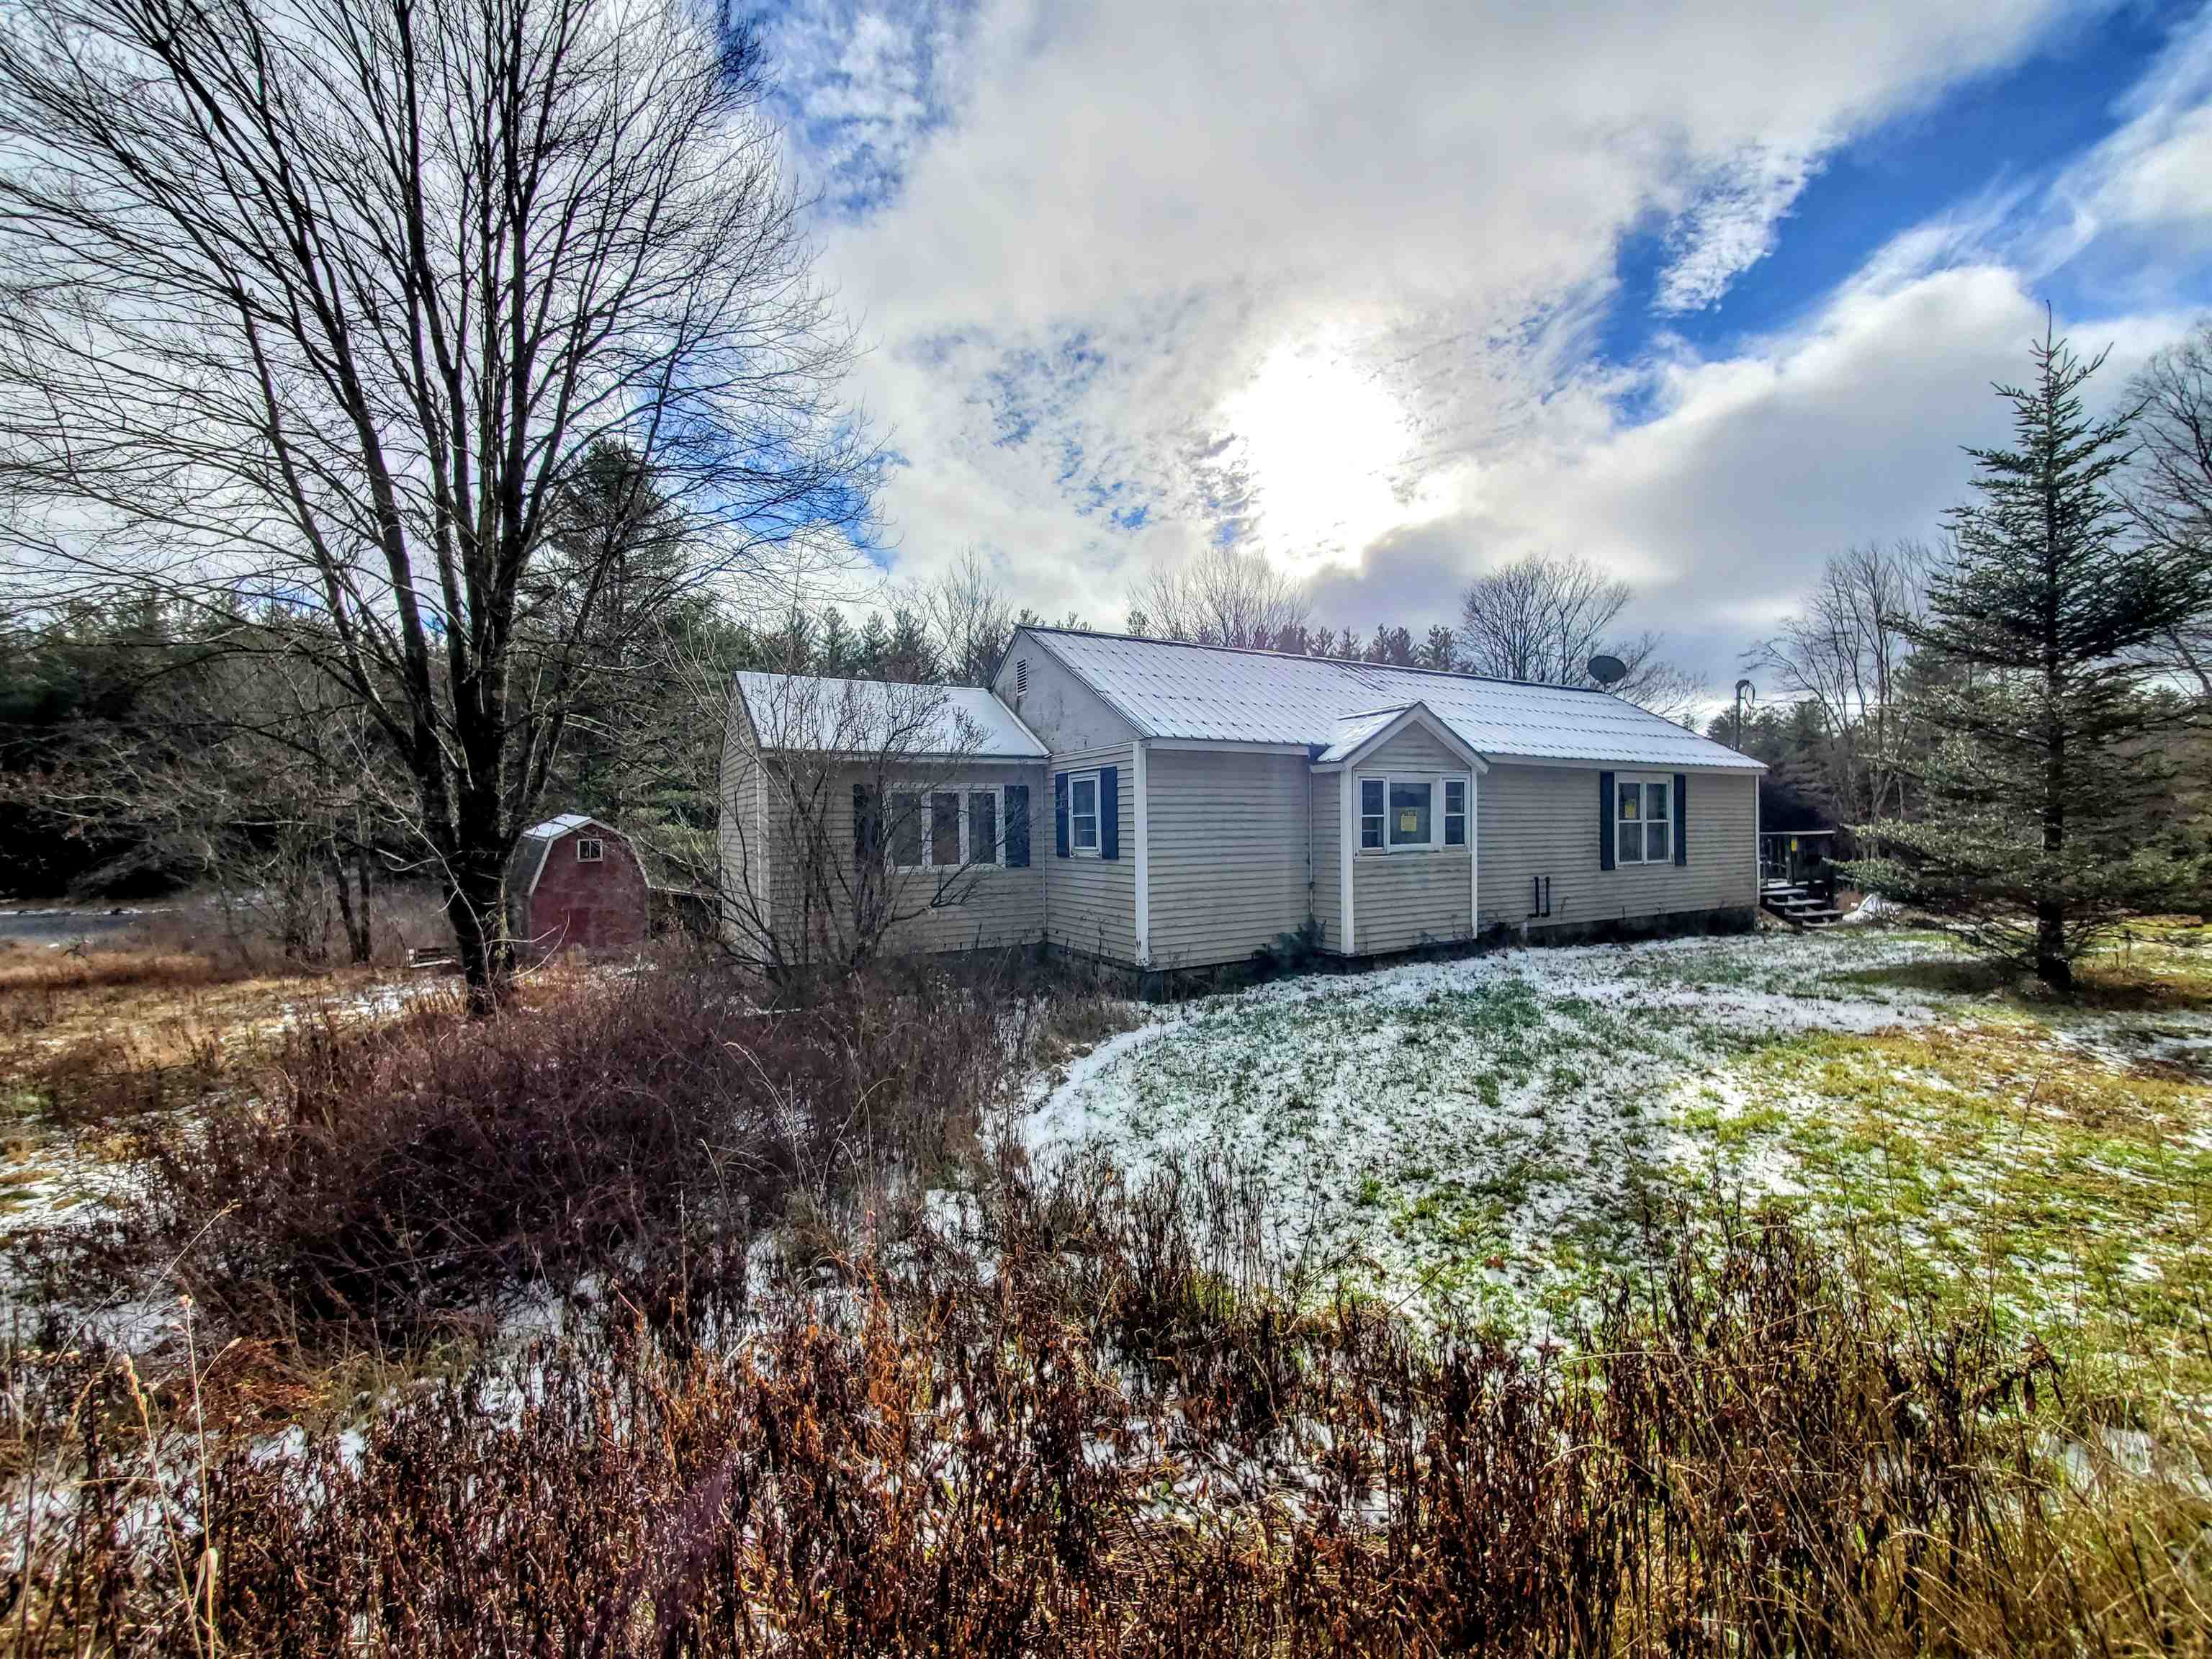 3 Homes for the Price of 1 on 10 acres with a...